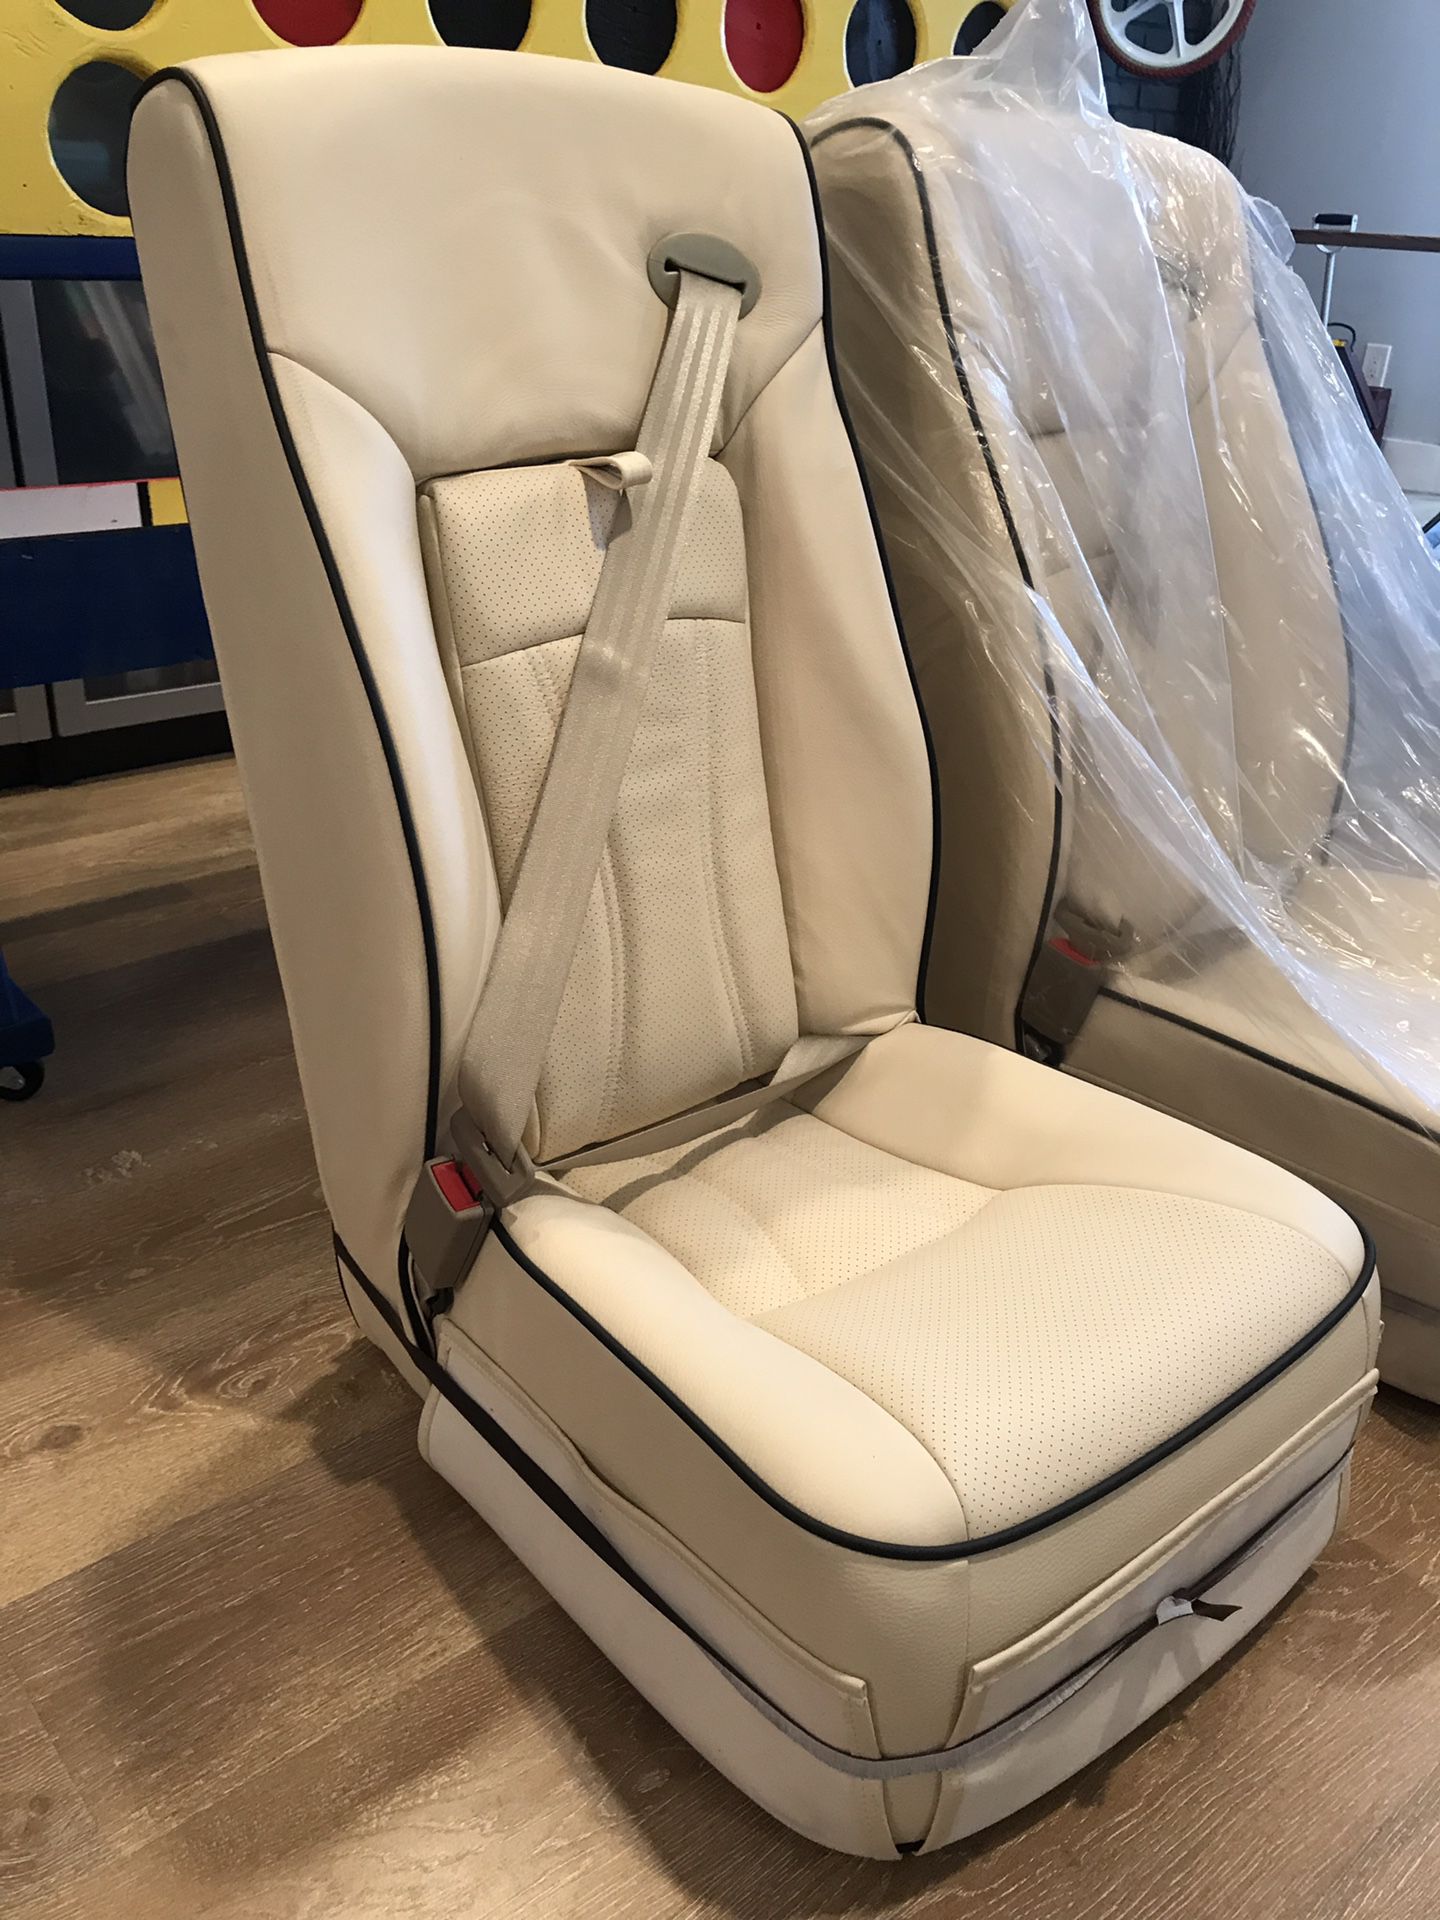 Cream color leather bus seat with built in seatbelt